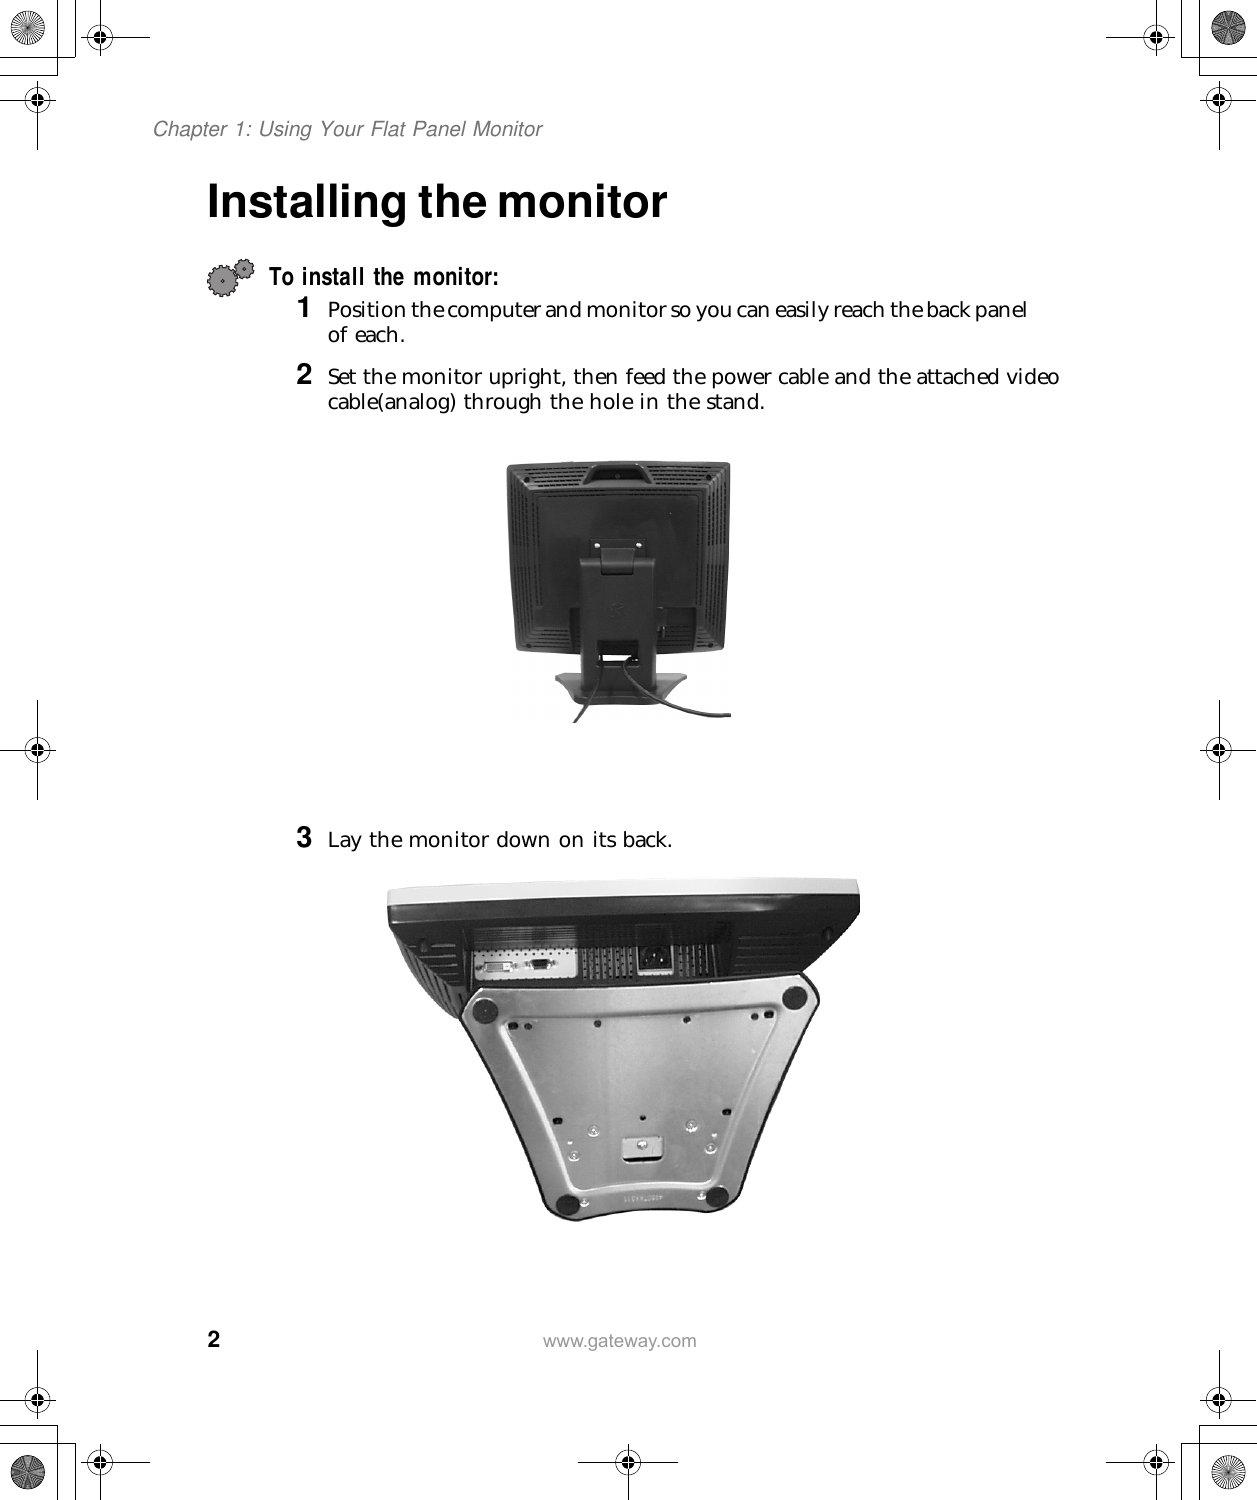 2Chapter 1: Using Your Flat Panel Monitorwww.gateway.comInstalling the monitorTo install the monitor:1 Position the computer and monitor so you can easily reach the back panel of each.2 Set the monitor upright, then feed the power cable and the attached video cable(analog) through the hole in the stand.3 Lay the monitor down on its back.